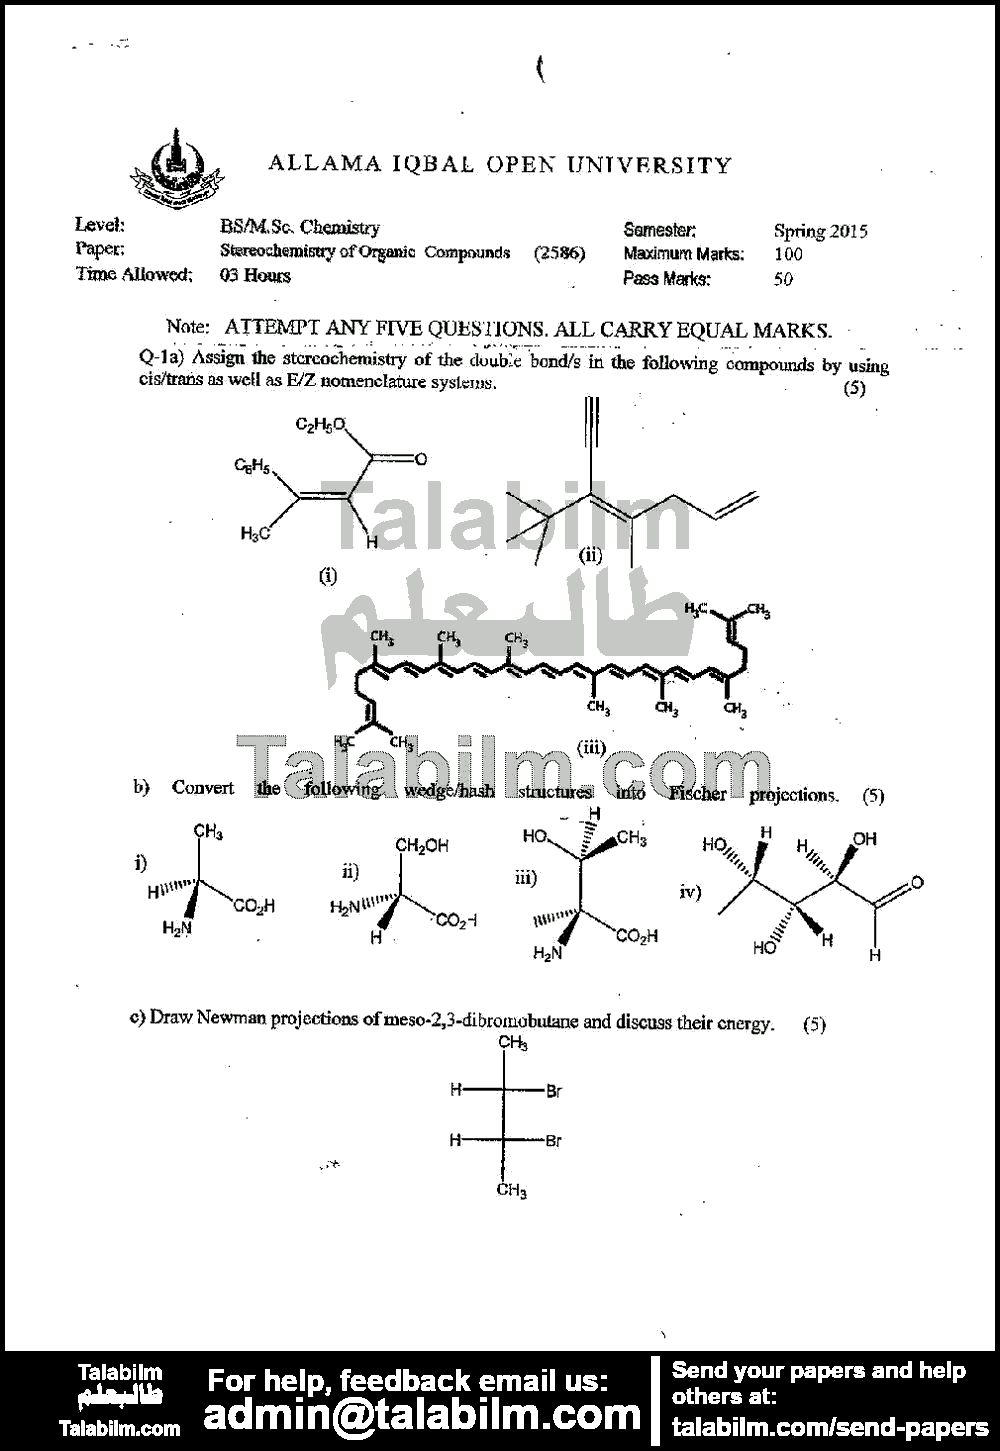 Stereochemistry of Organic Compounds 2586 past paper for Spring 2015